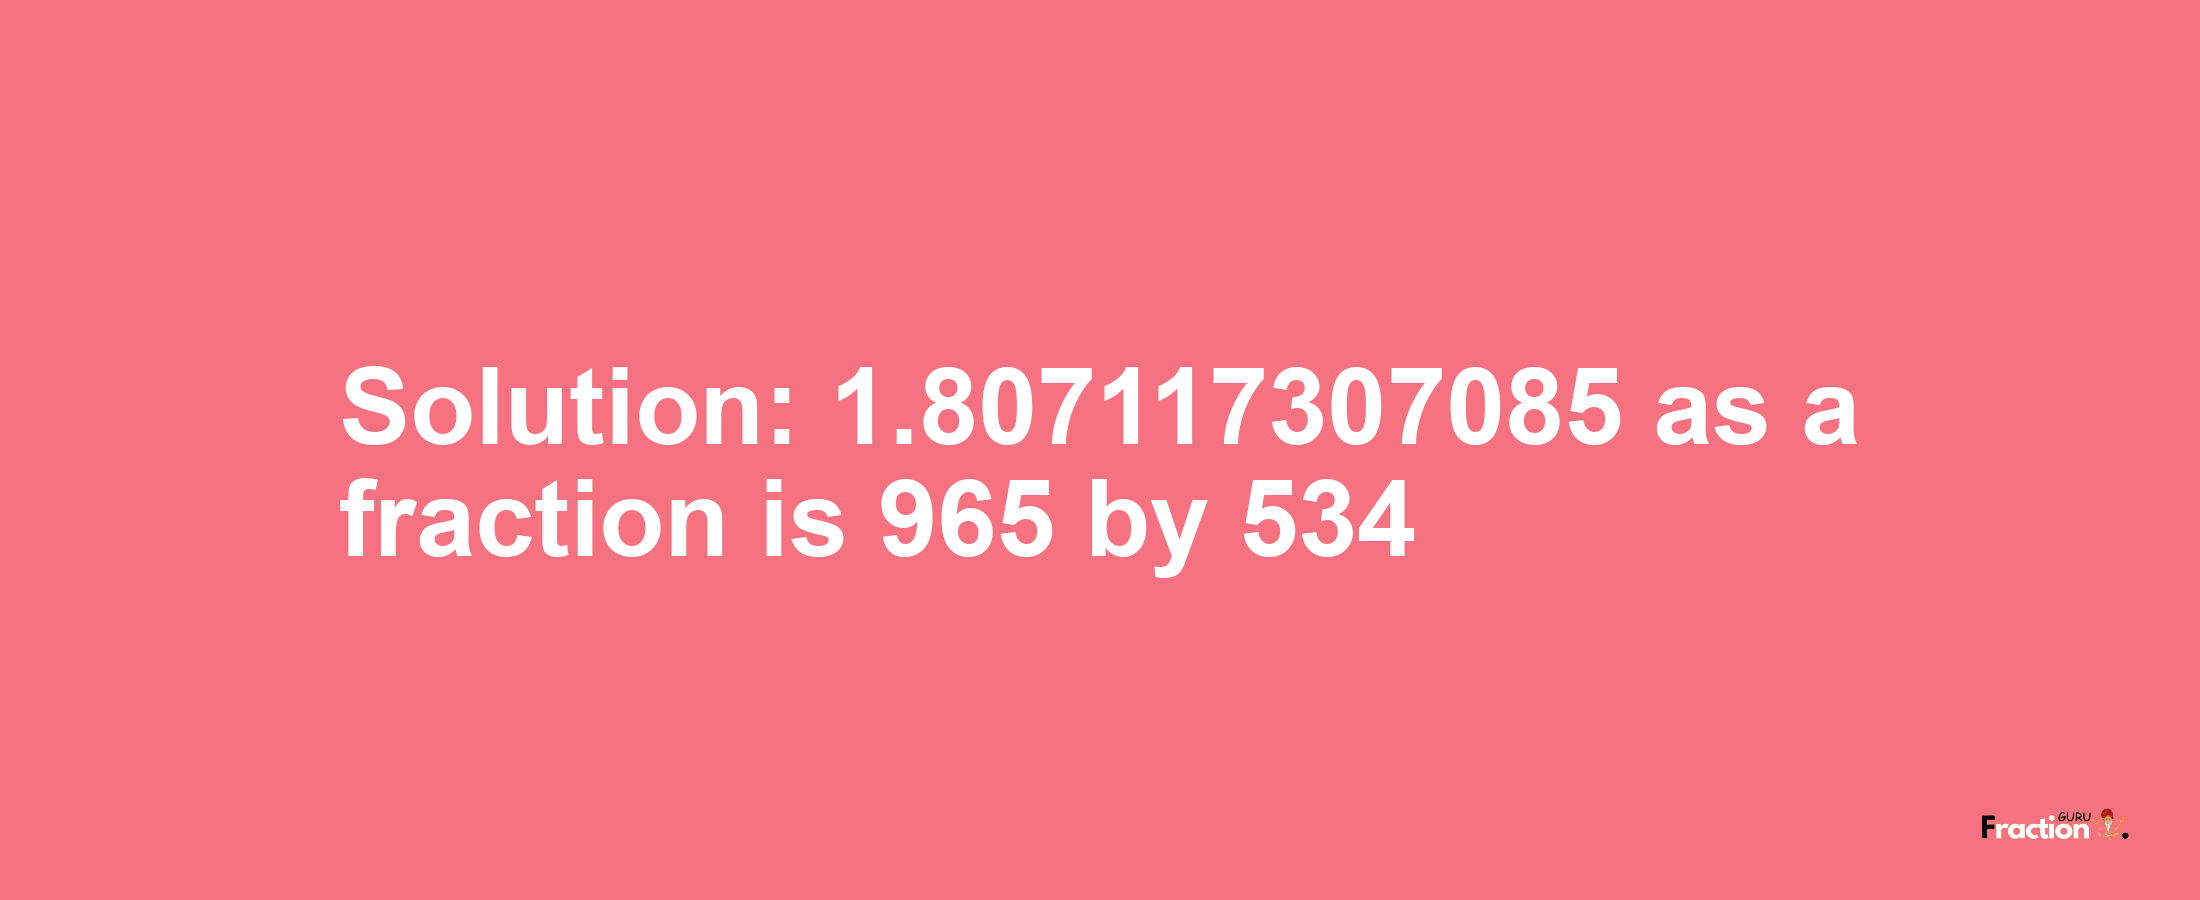 Solution:1.807117307085 as a fraction is 965/534